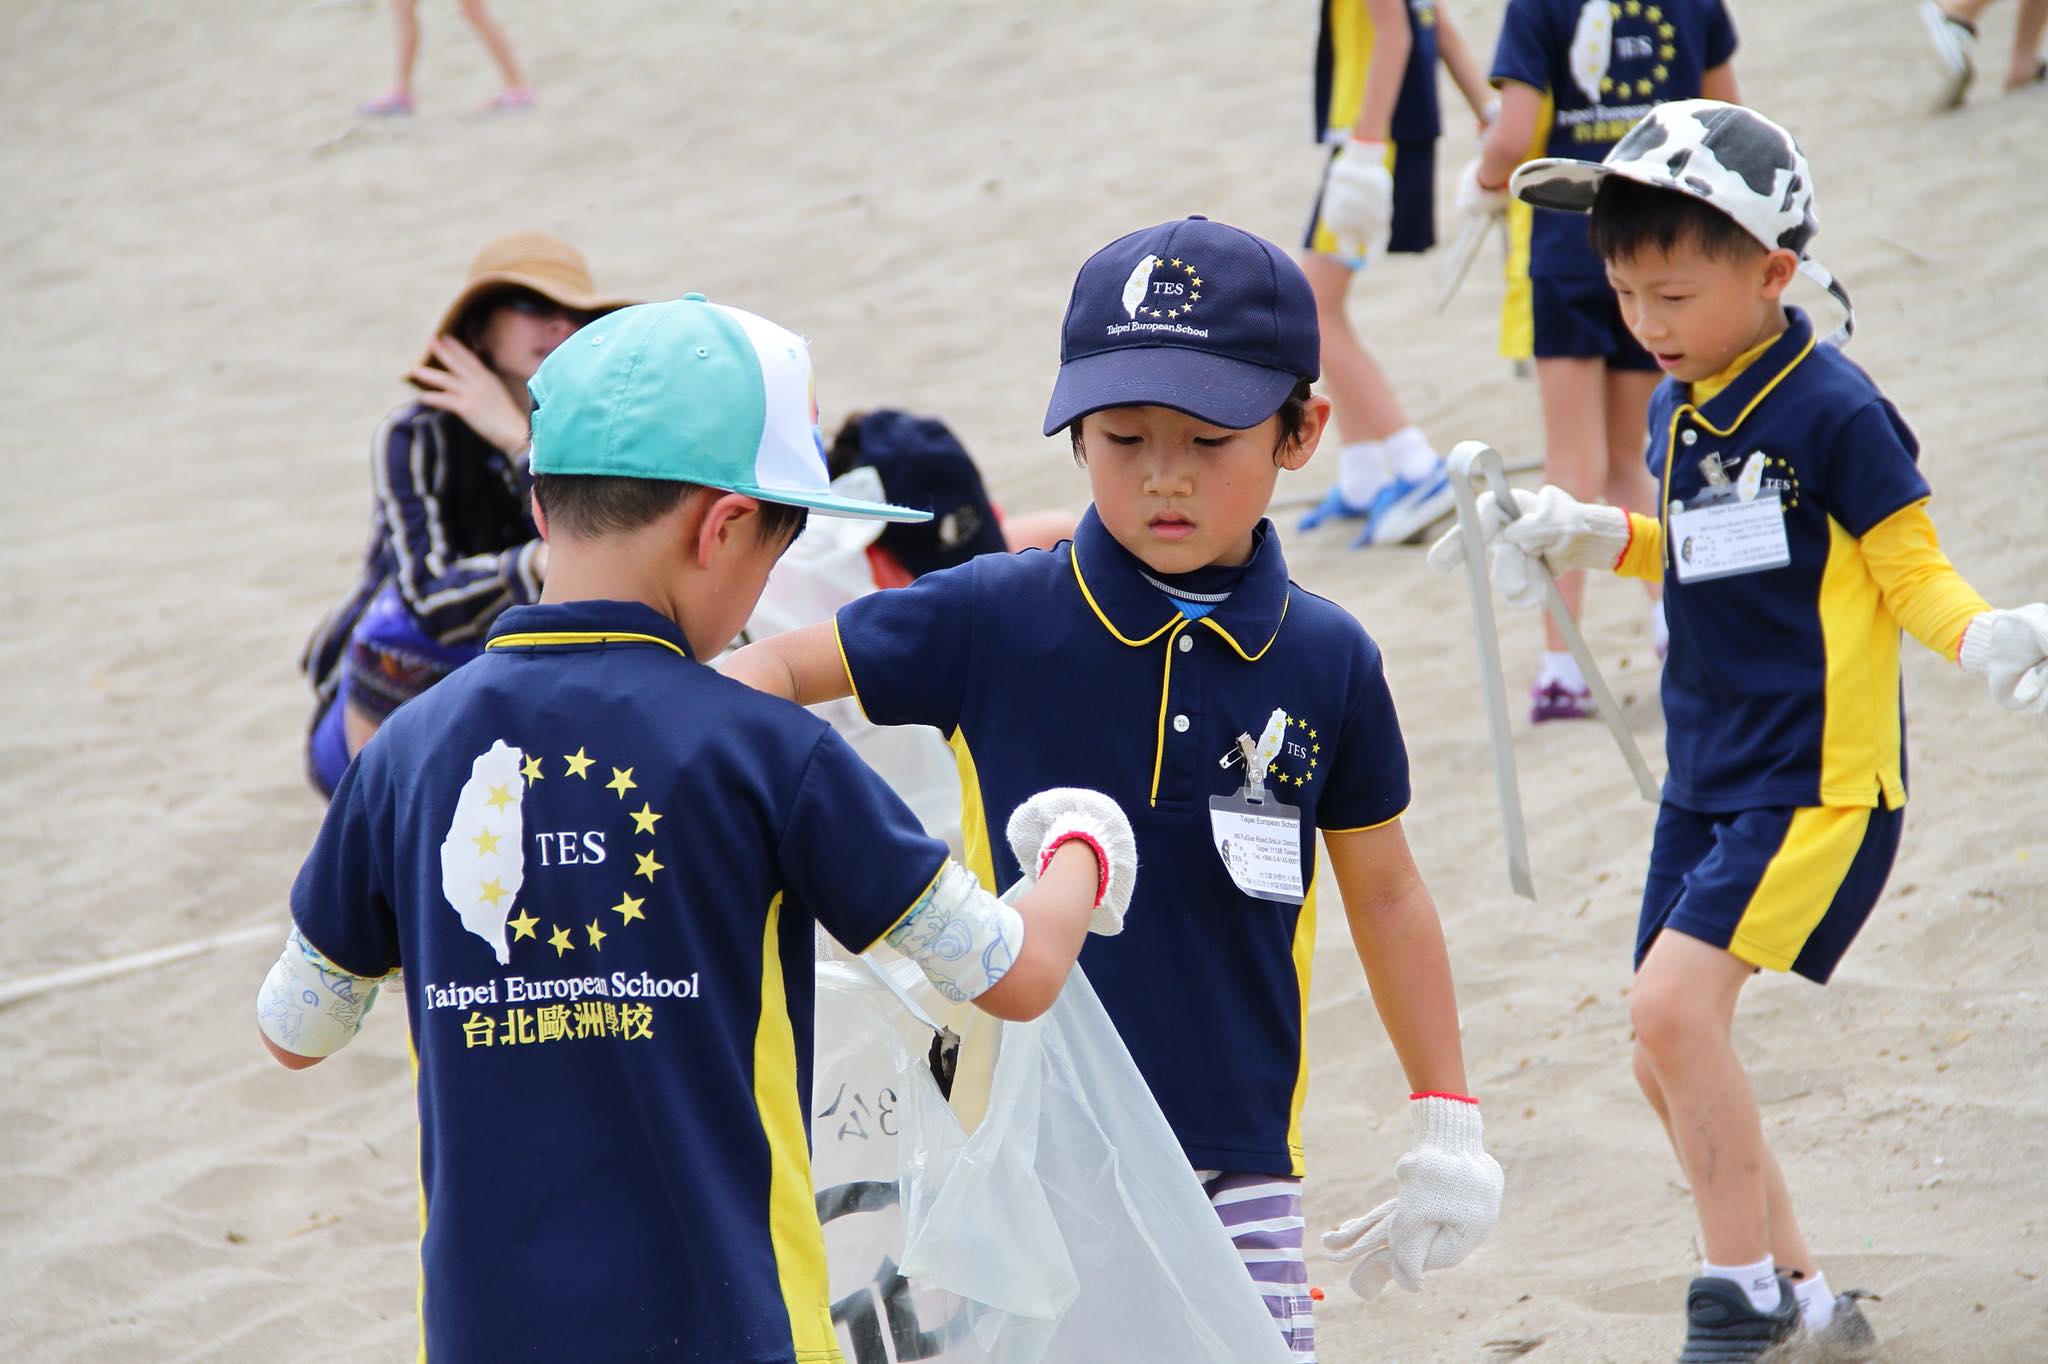 Children helped to clean the beach